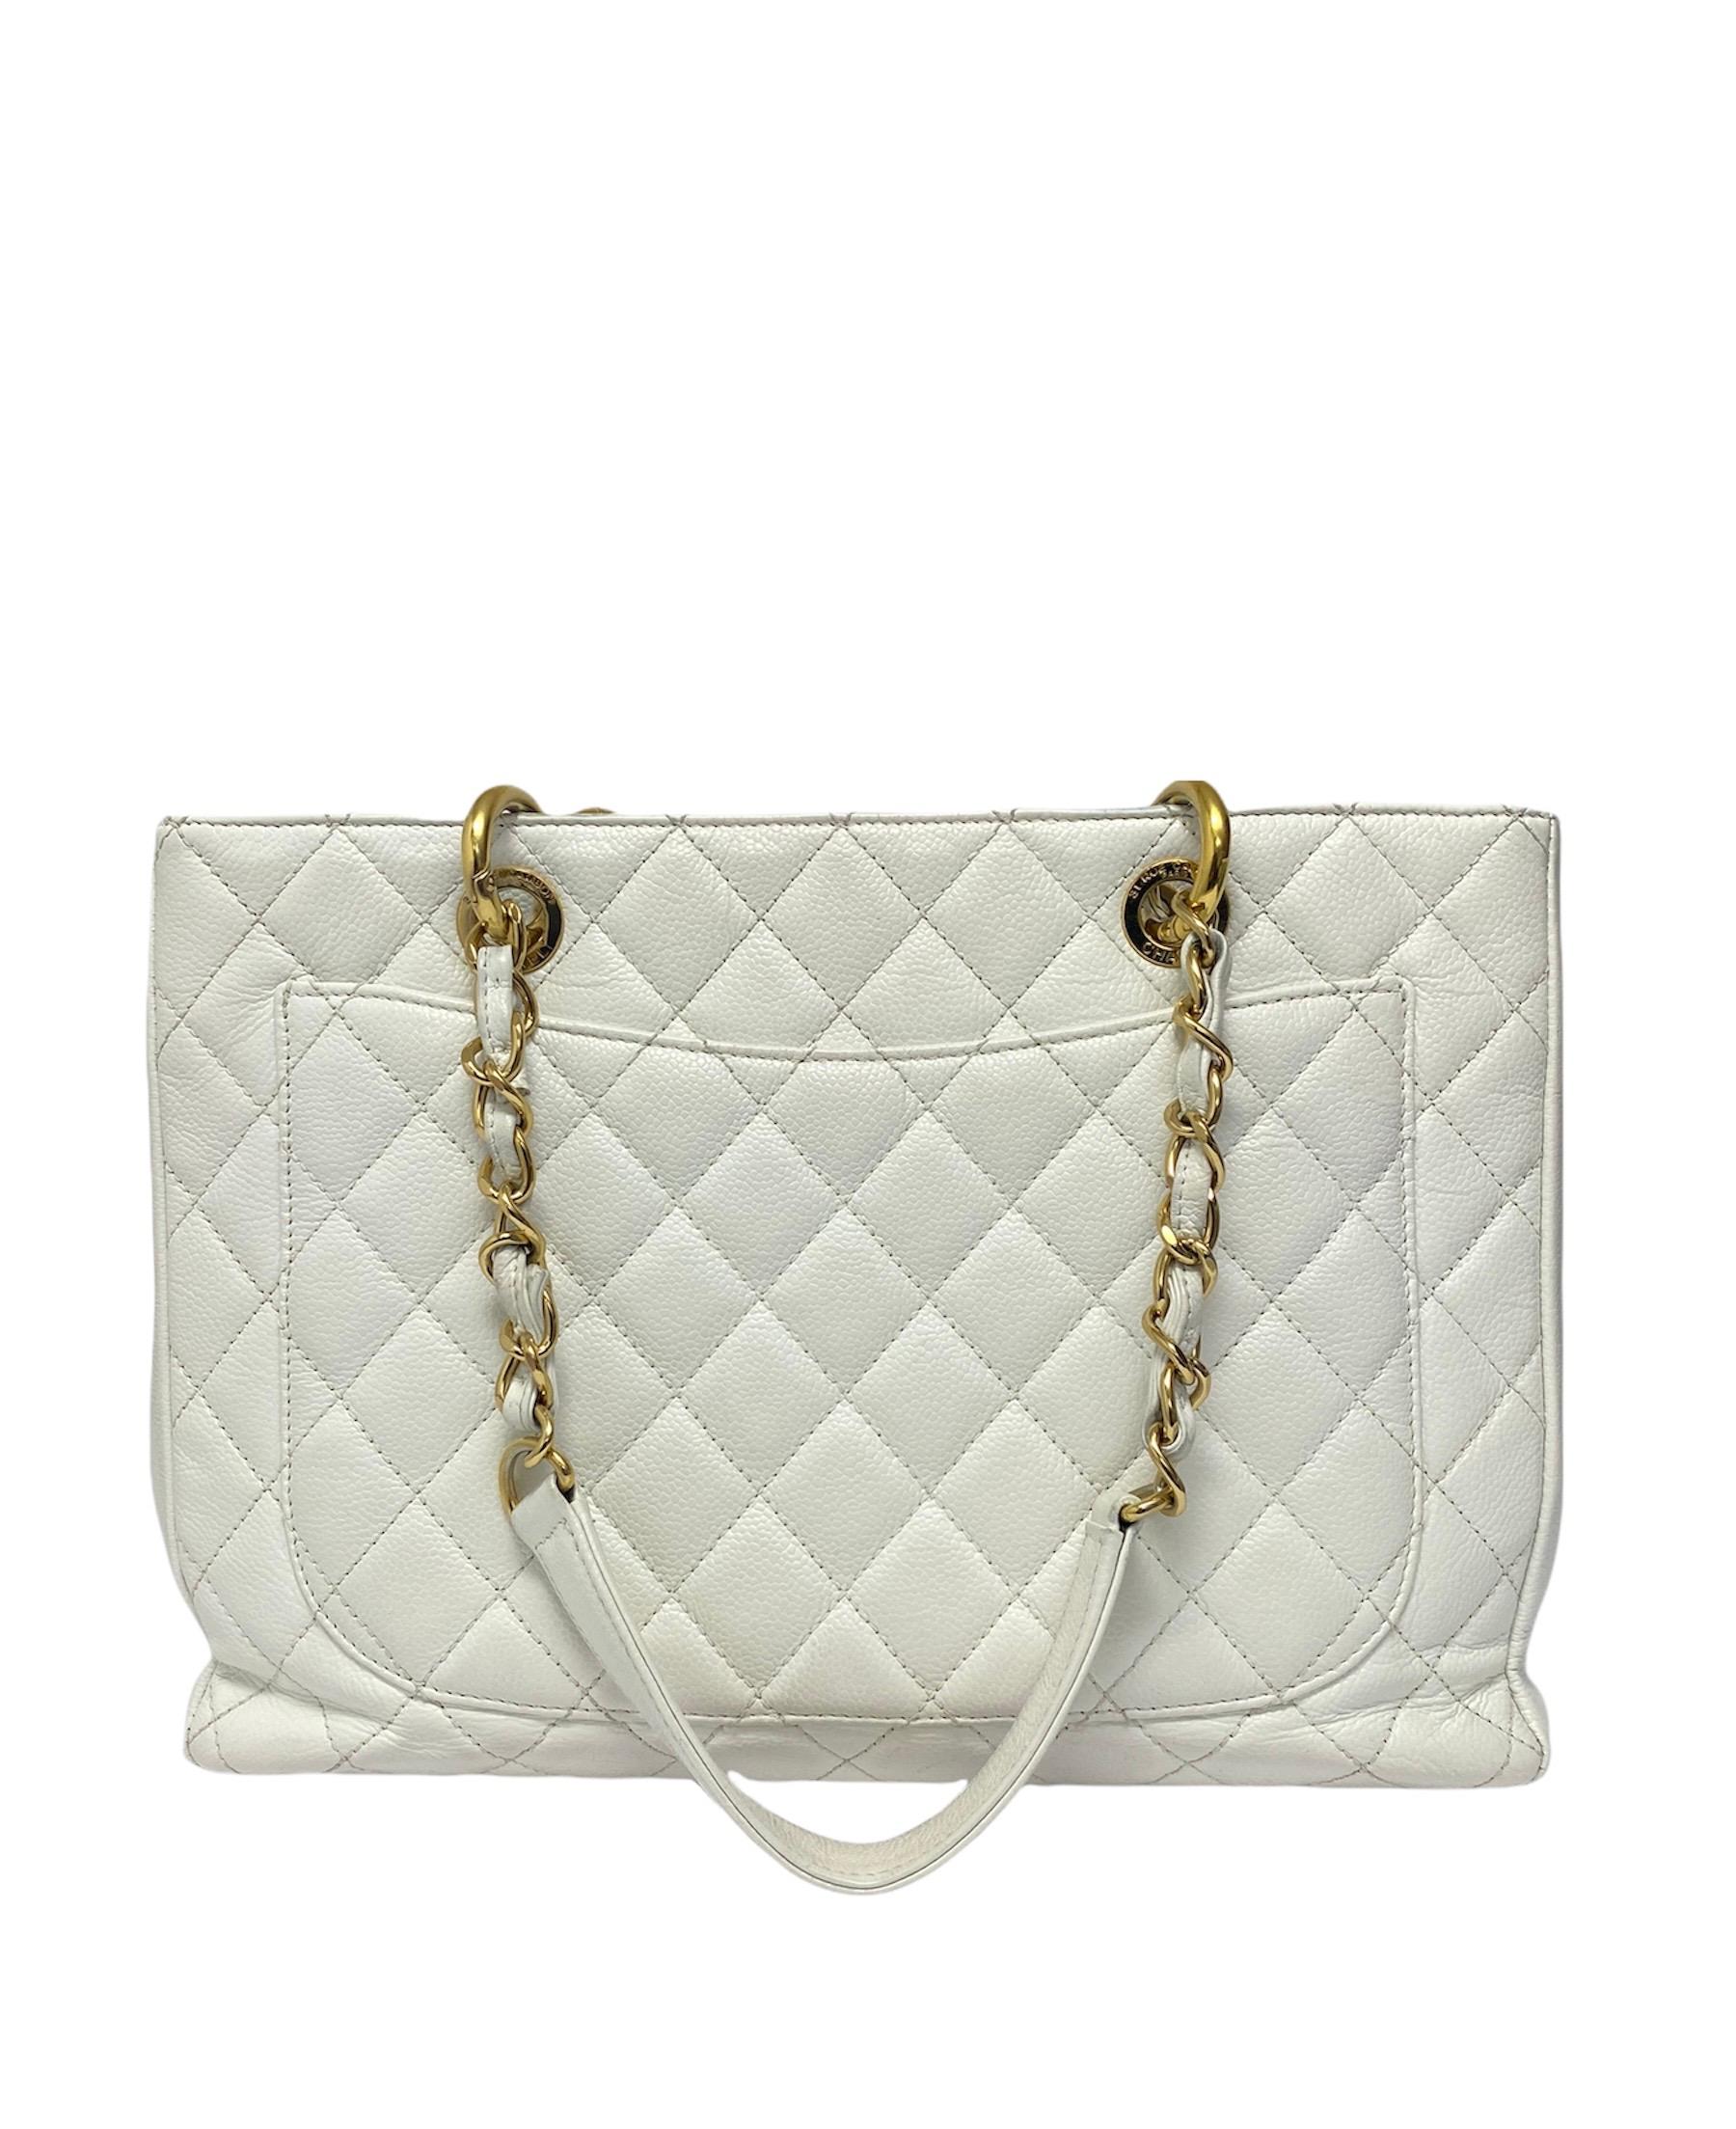 Gray 2011 Chanel White Leather GST Bag